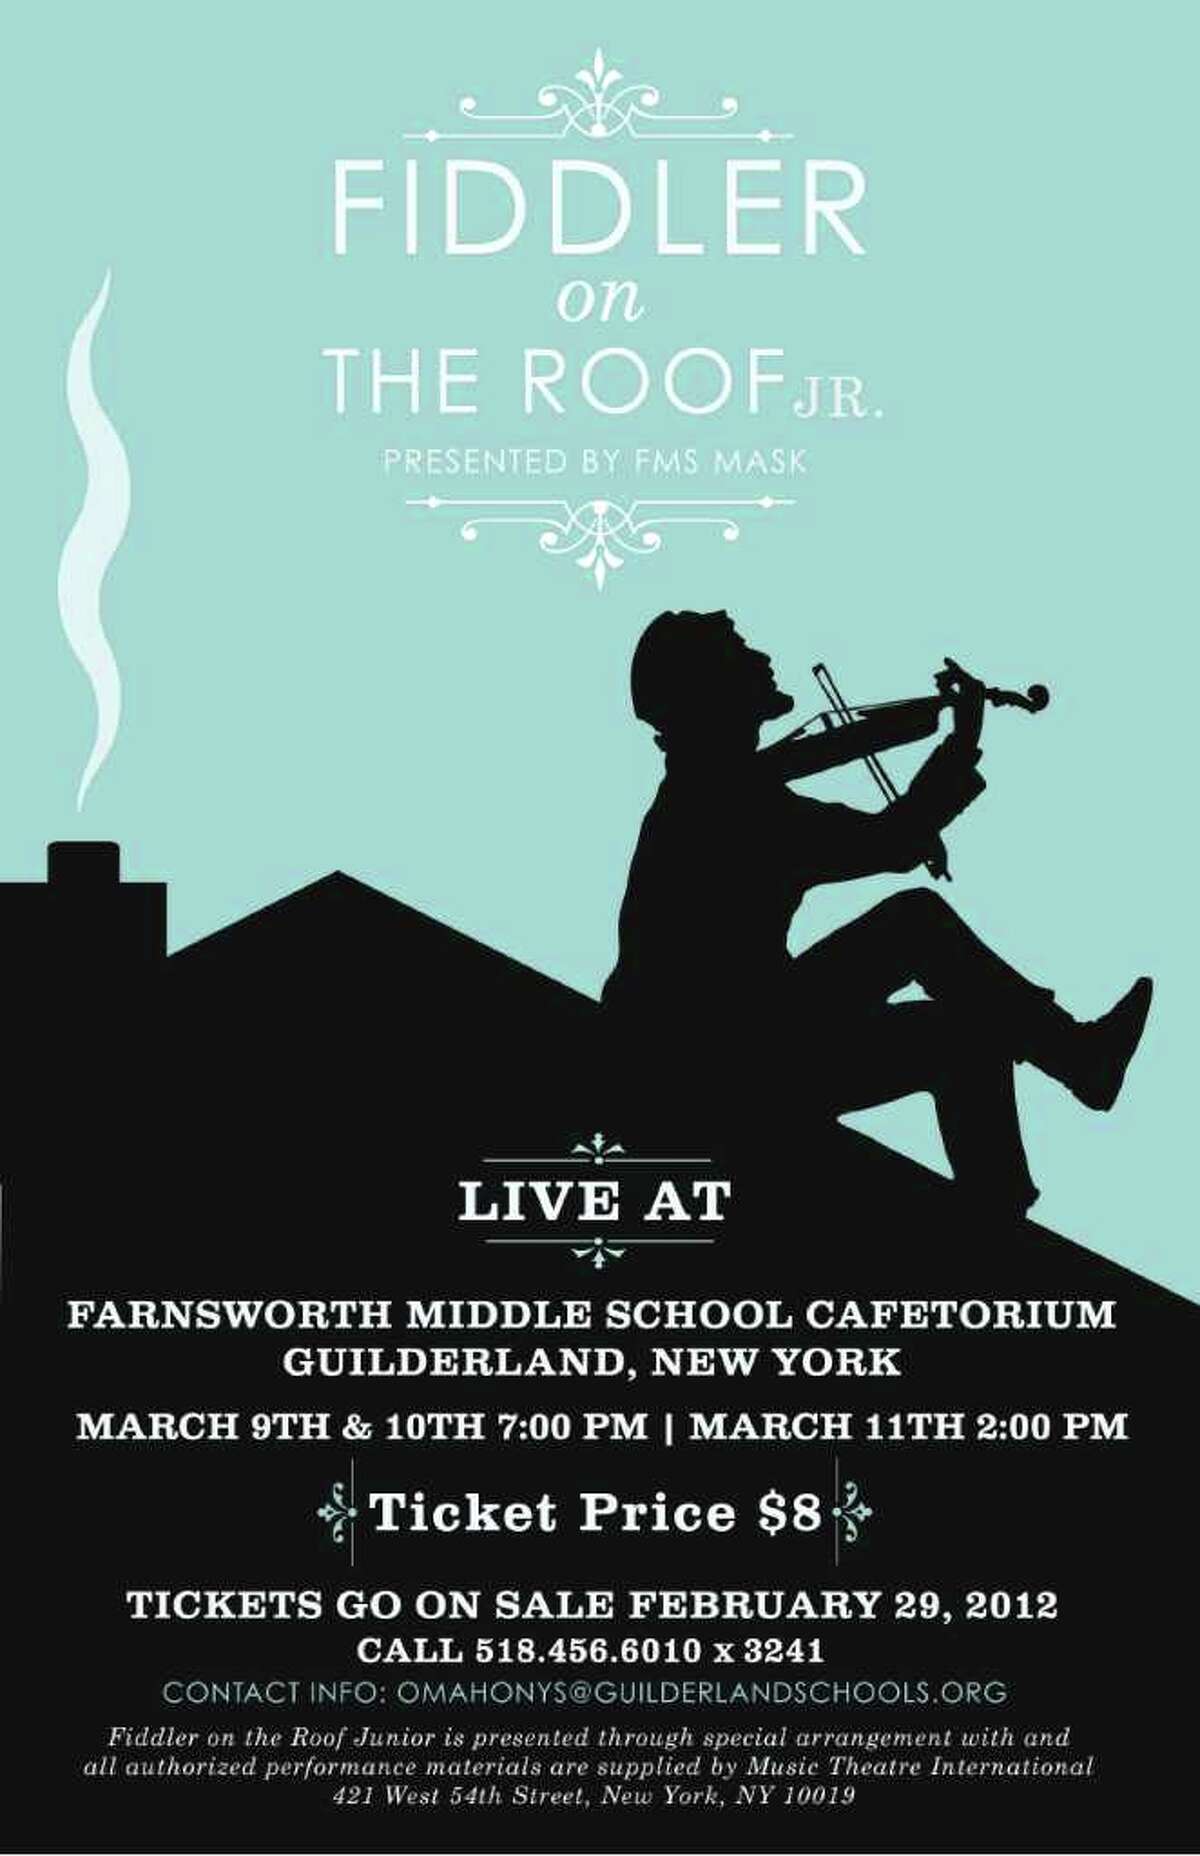 Fiddler on the Roof poster, Farnsworth Middle School